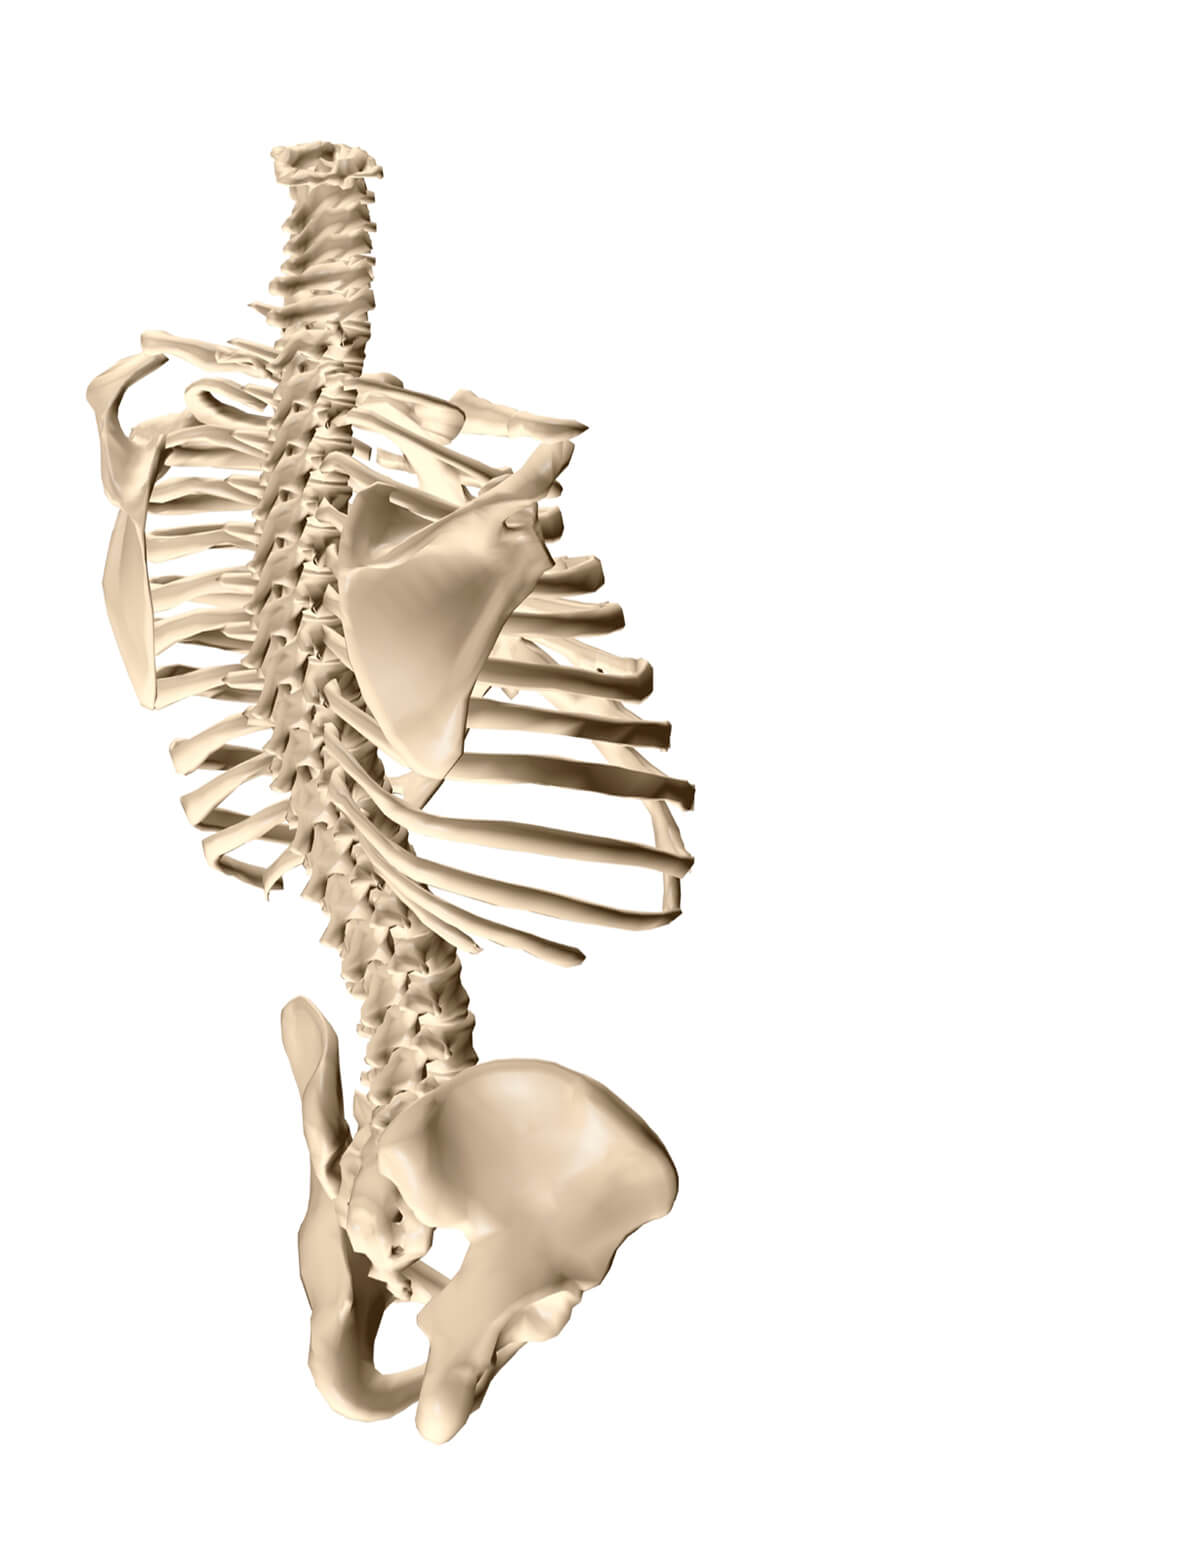 What Causes Scoliosis